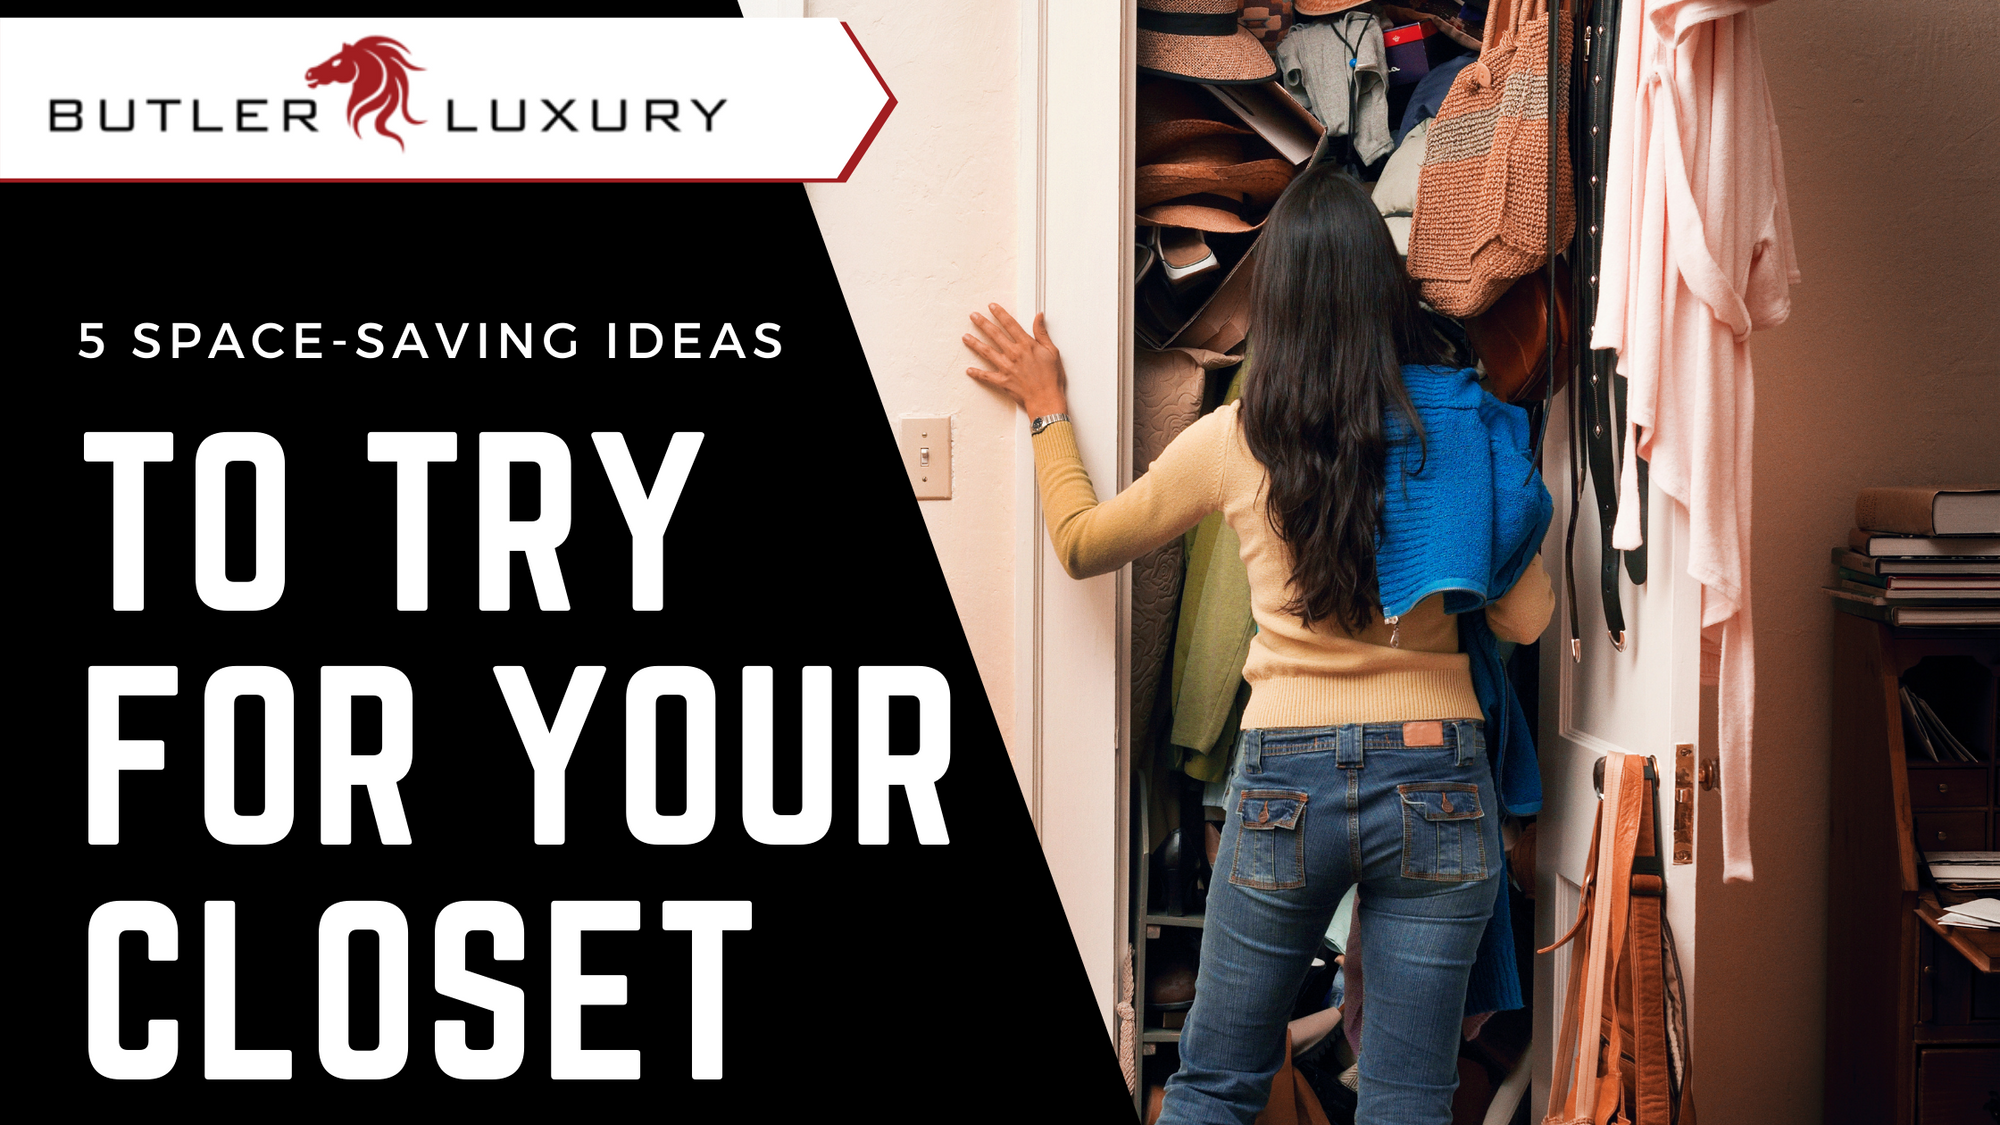 5 Space Saving Ideas to Try for Your Closet